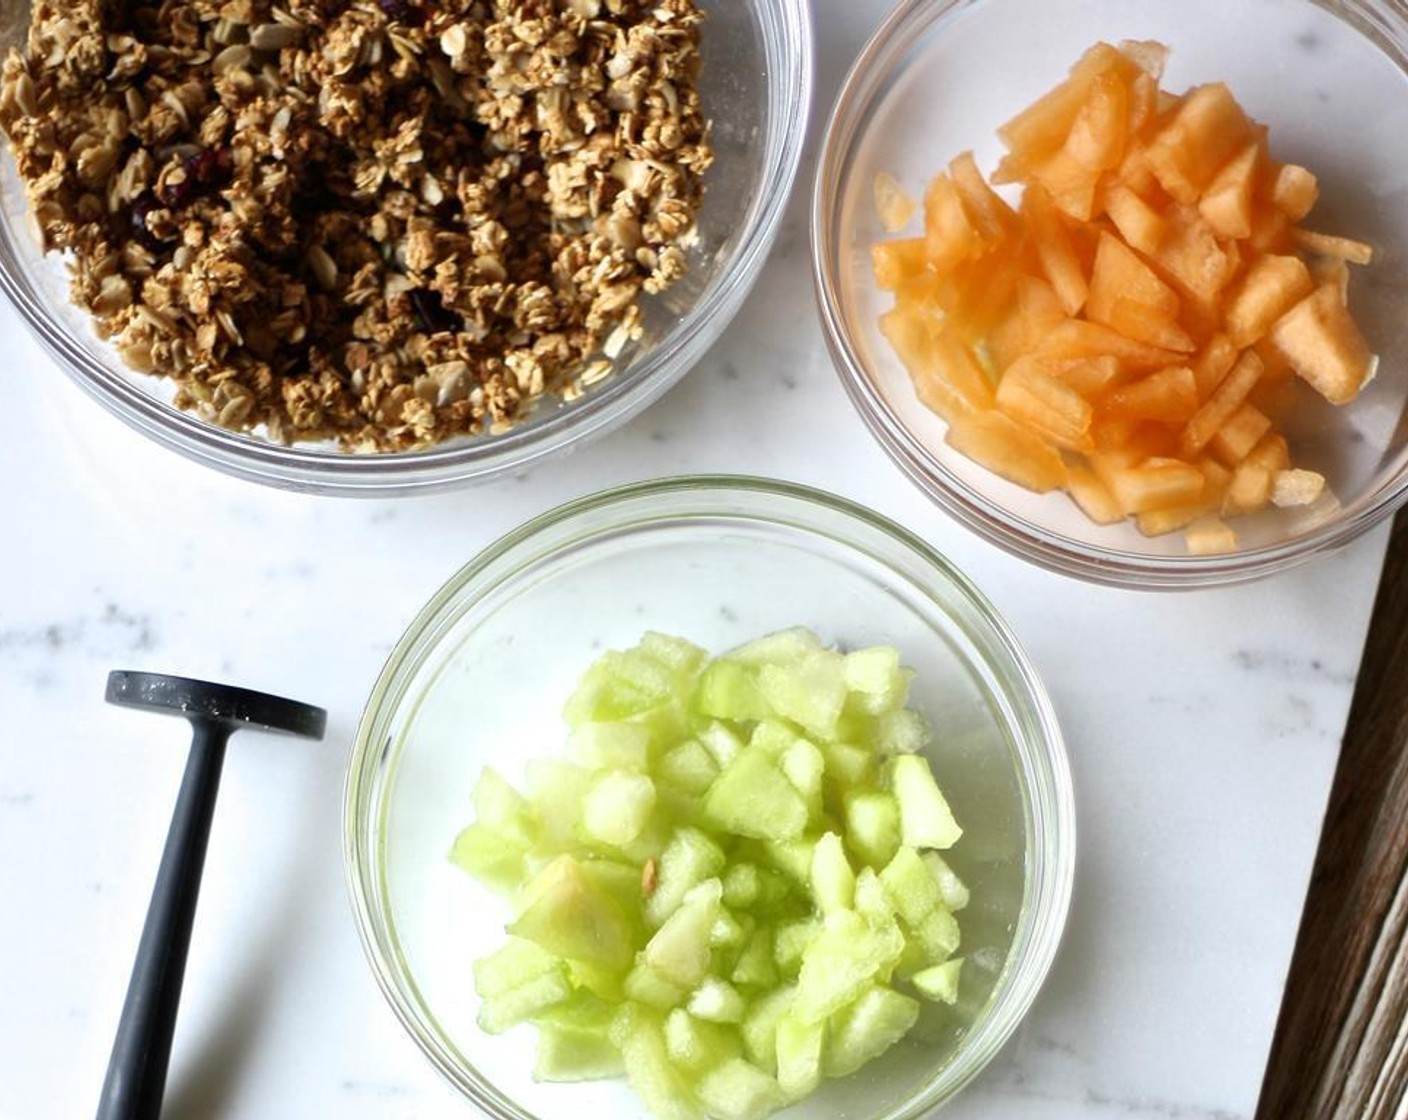 step 1 Finely dice the Honeydew Melon (1/4 cup) and Cantaloupe (1/4 cup). Place each in a separate bowl, along with the Granola (2 cups).